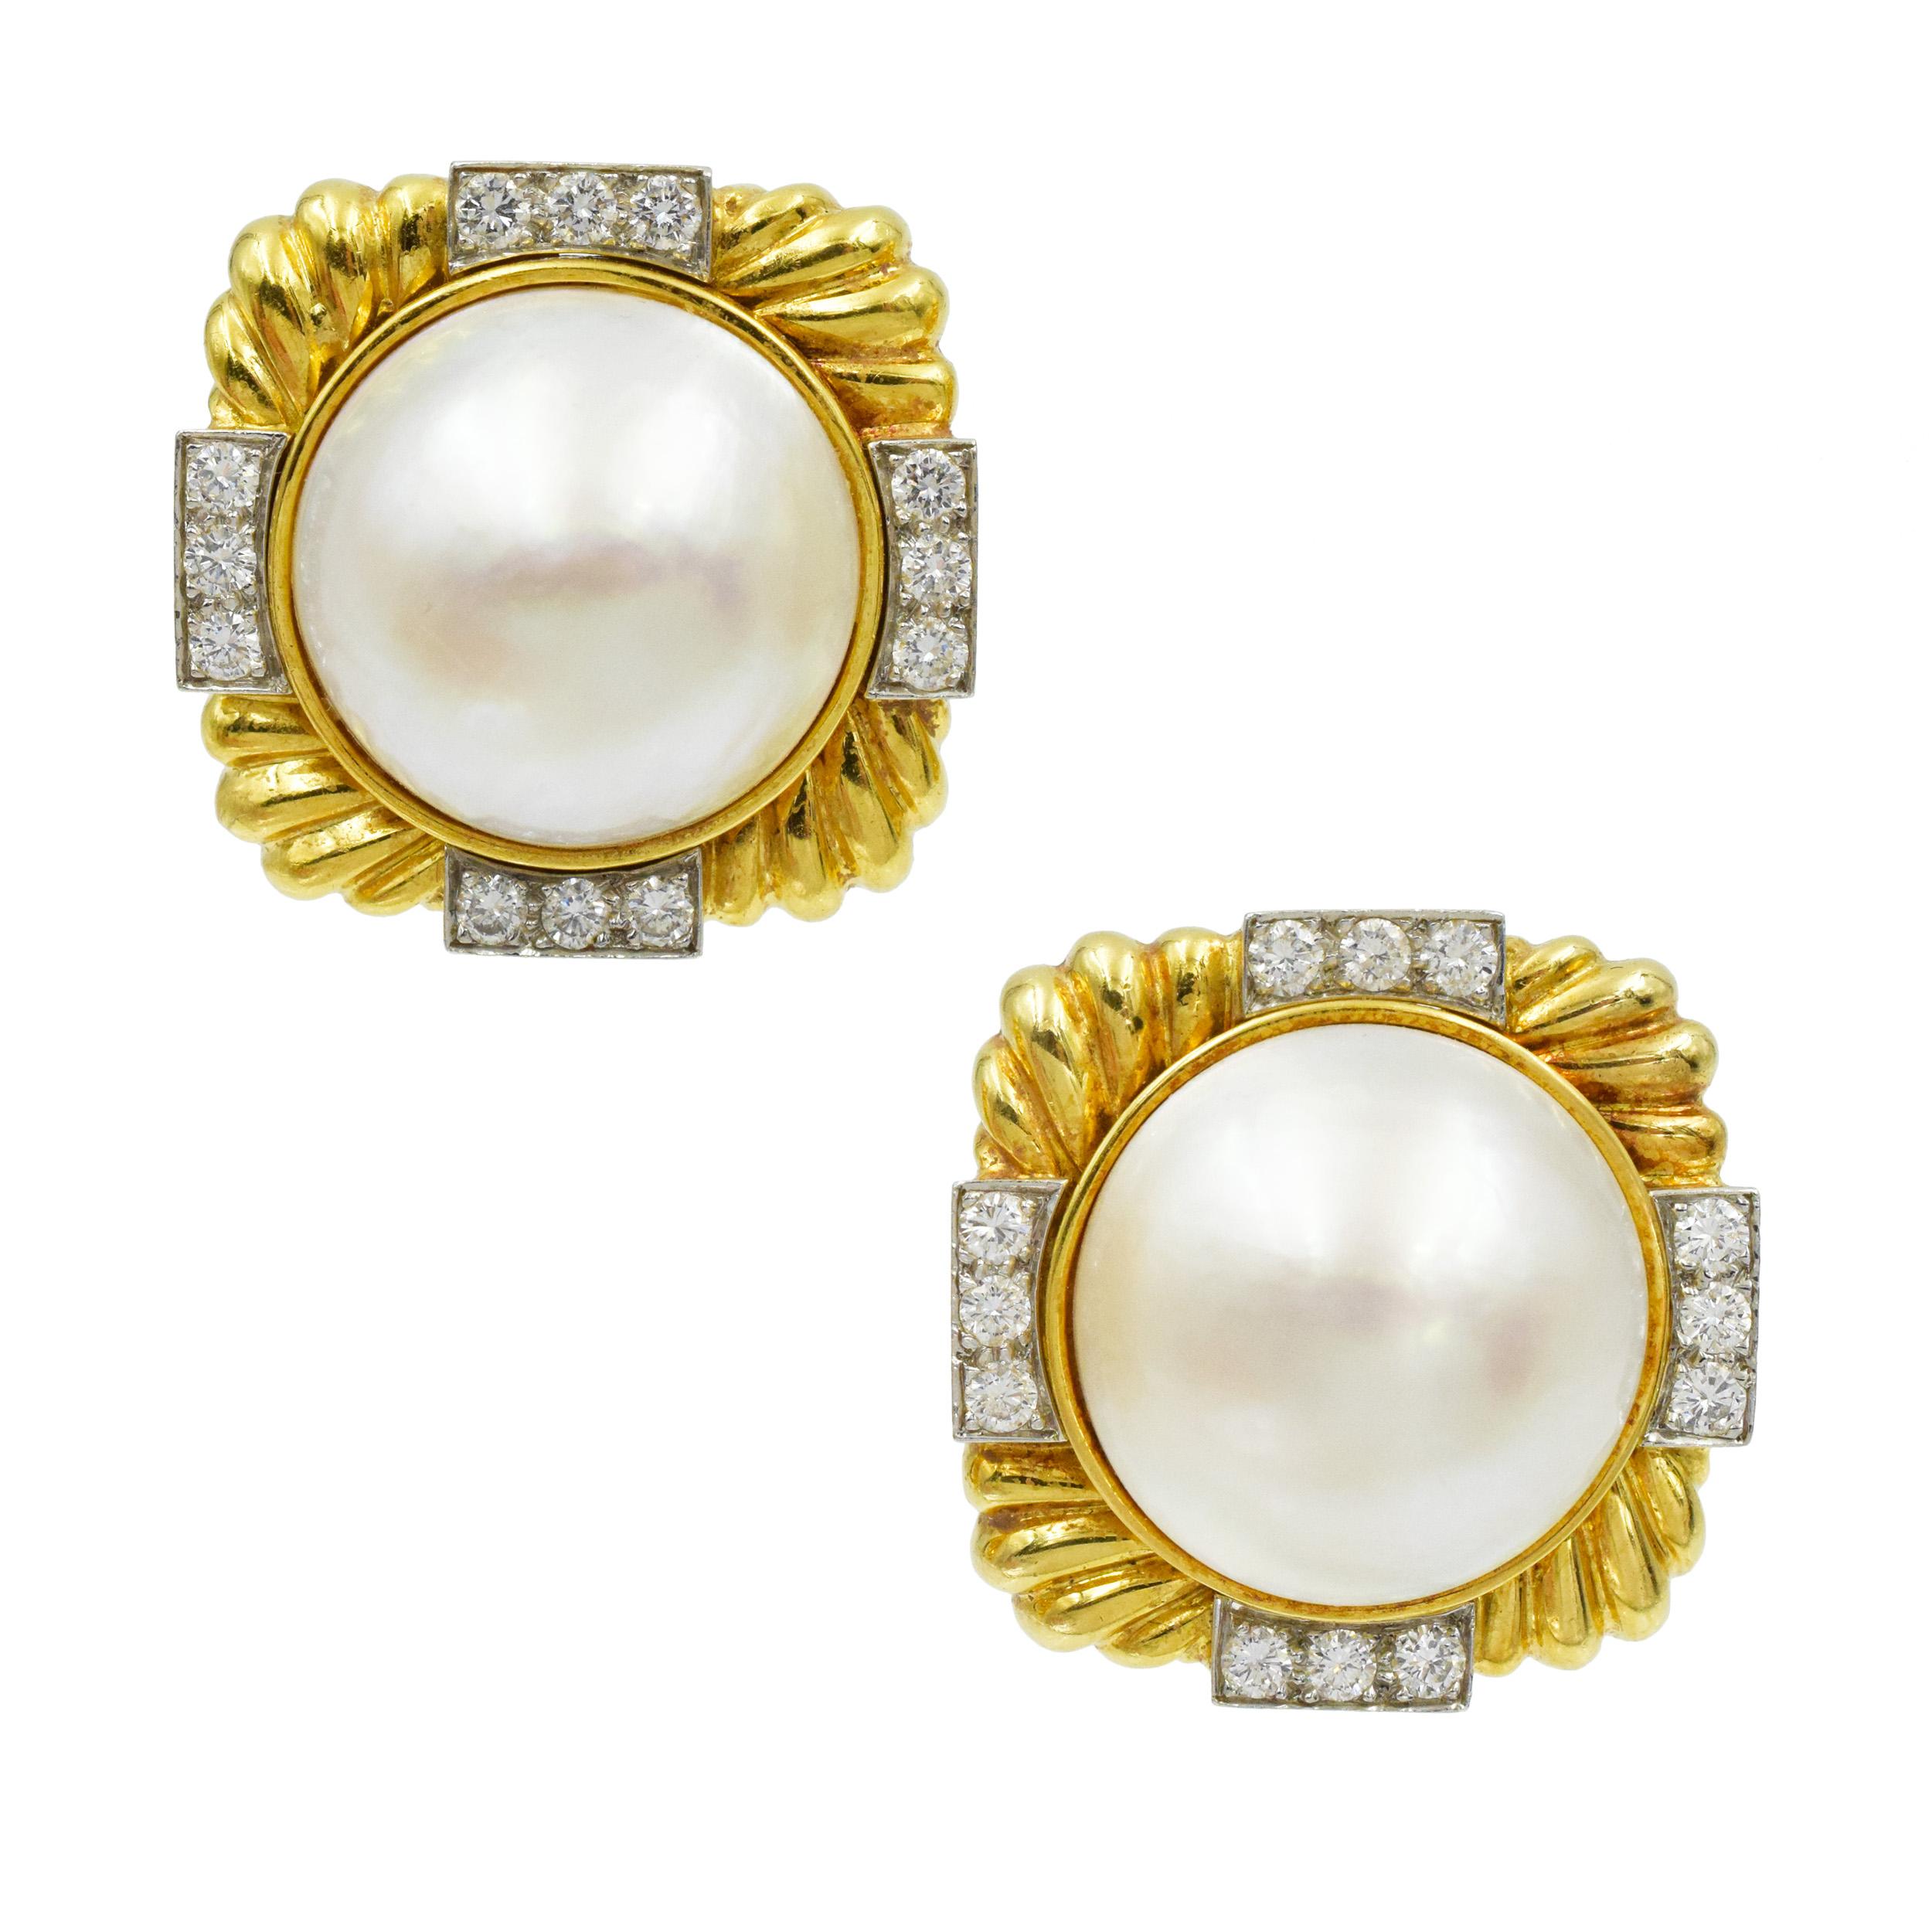 David Webb Diamond and Pearl earrings in 18k yellow gold and platinum. These earrings have mabe- pearl centers set in 18k yellow fluted gold
earrings with 24 round diamonds weighing approximately 1.20 carats total. Equipped
with Clip backs.